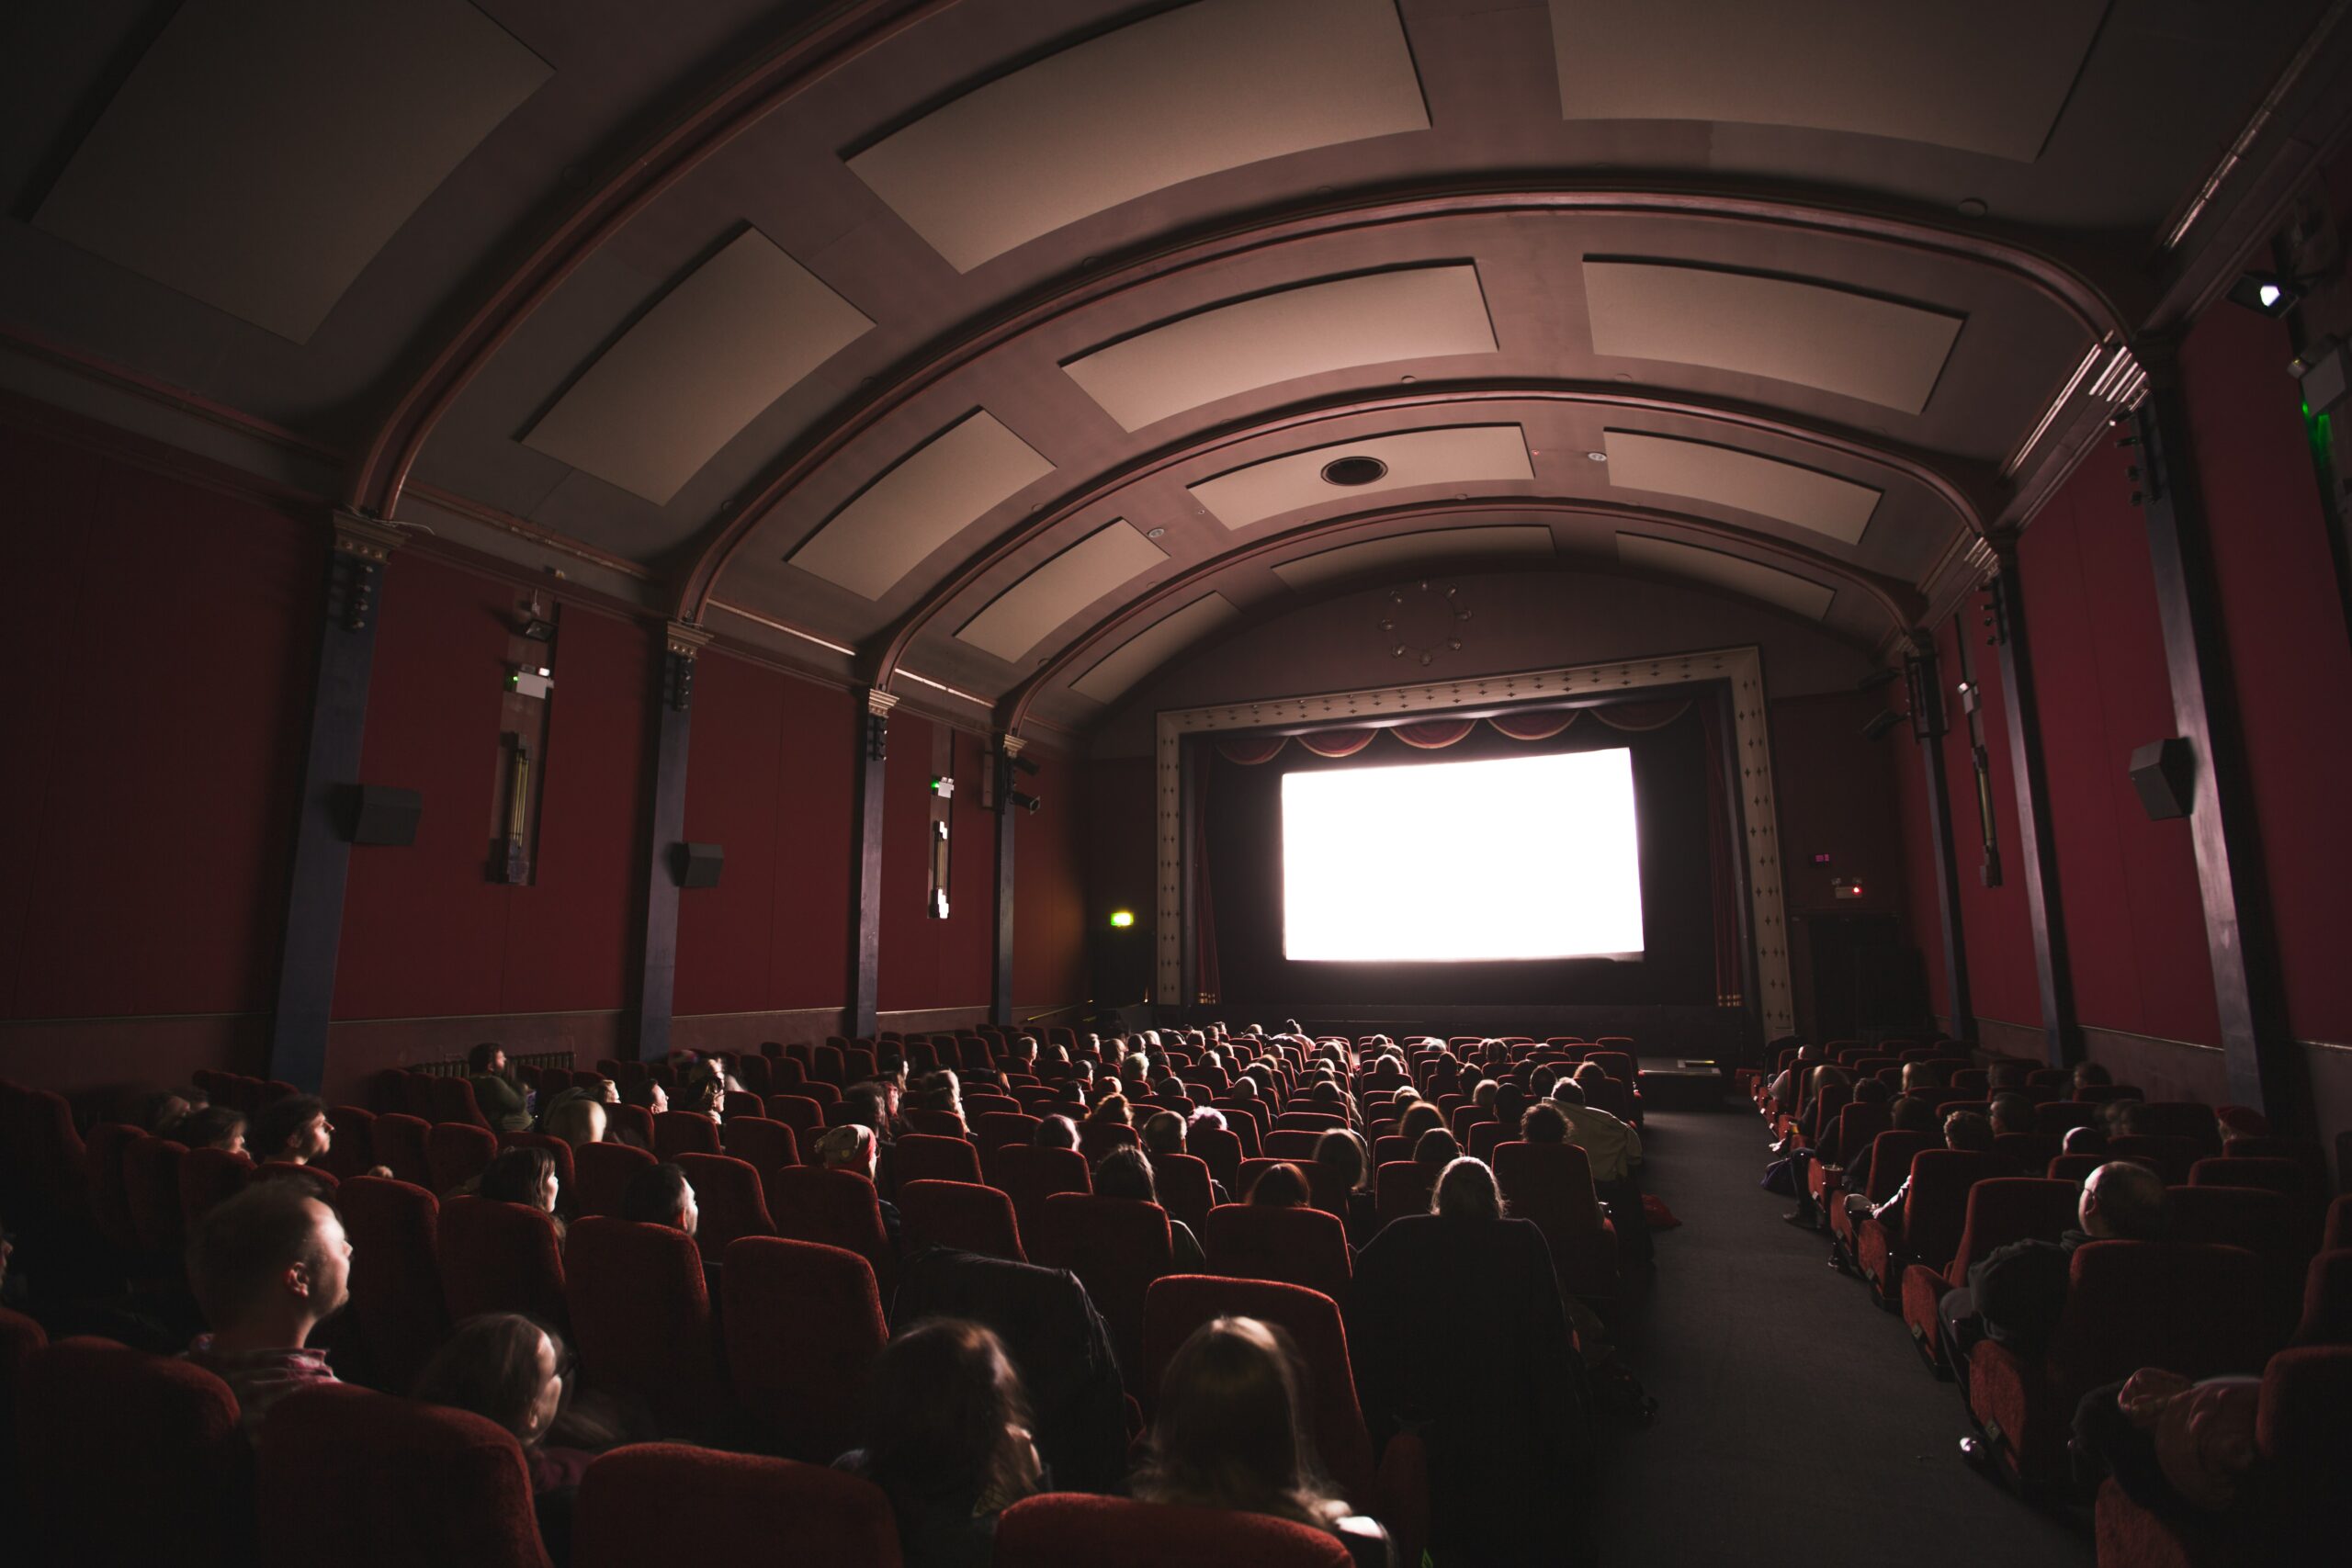 A full movie theatre watching a blank projection